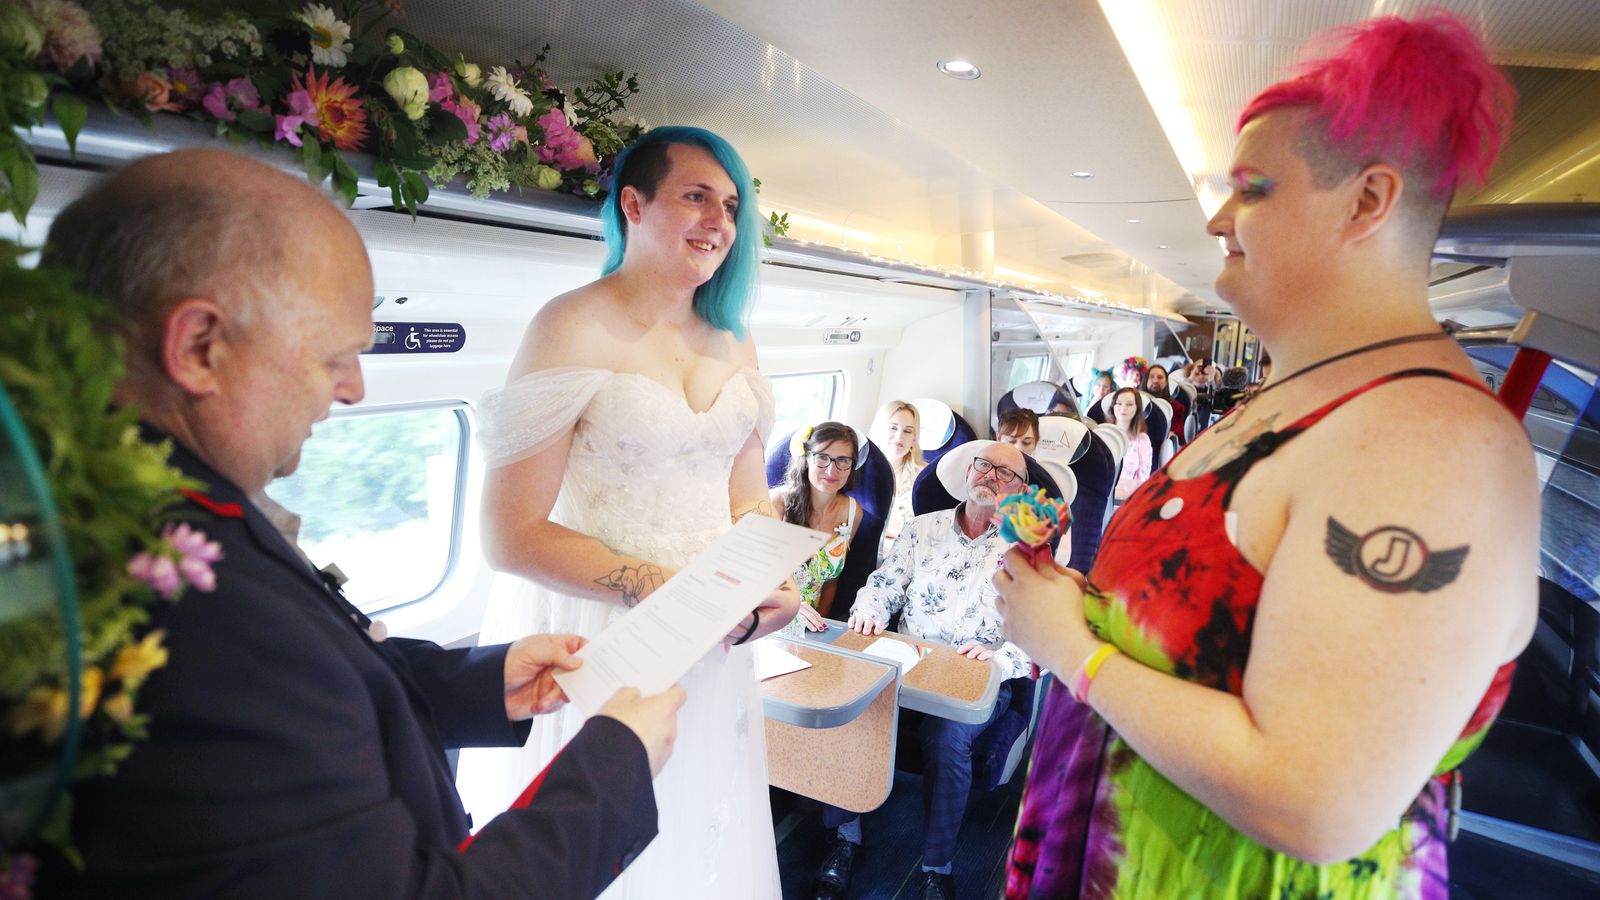 A very moving service: Rail enthusiasts get married on train from London Euston